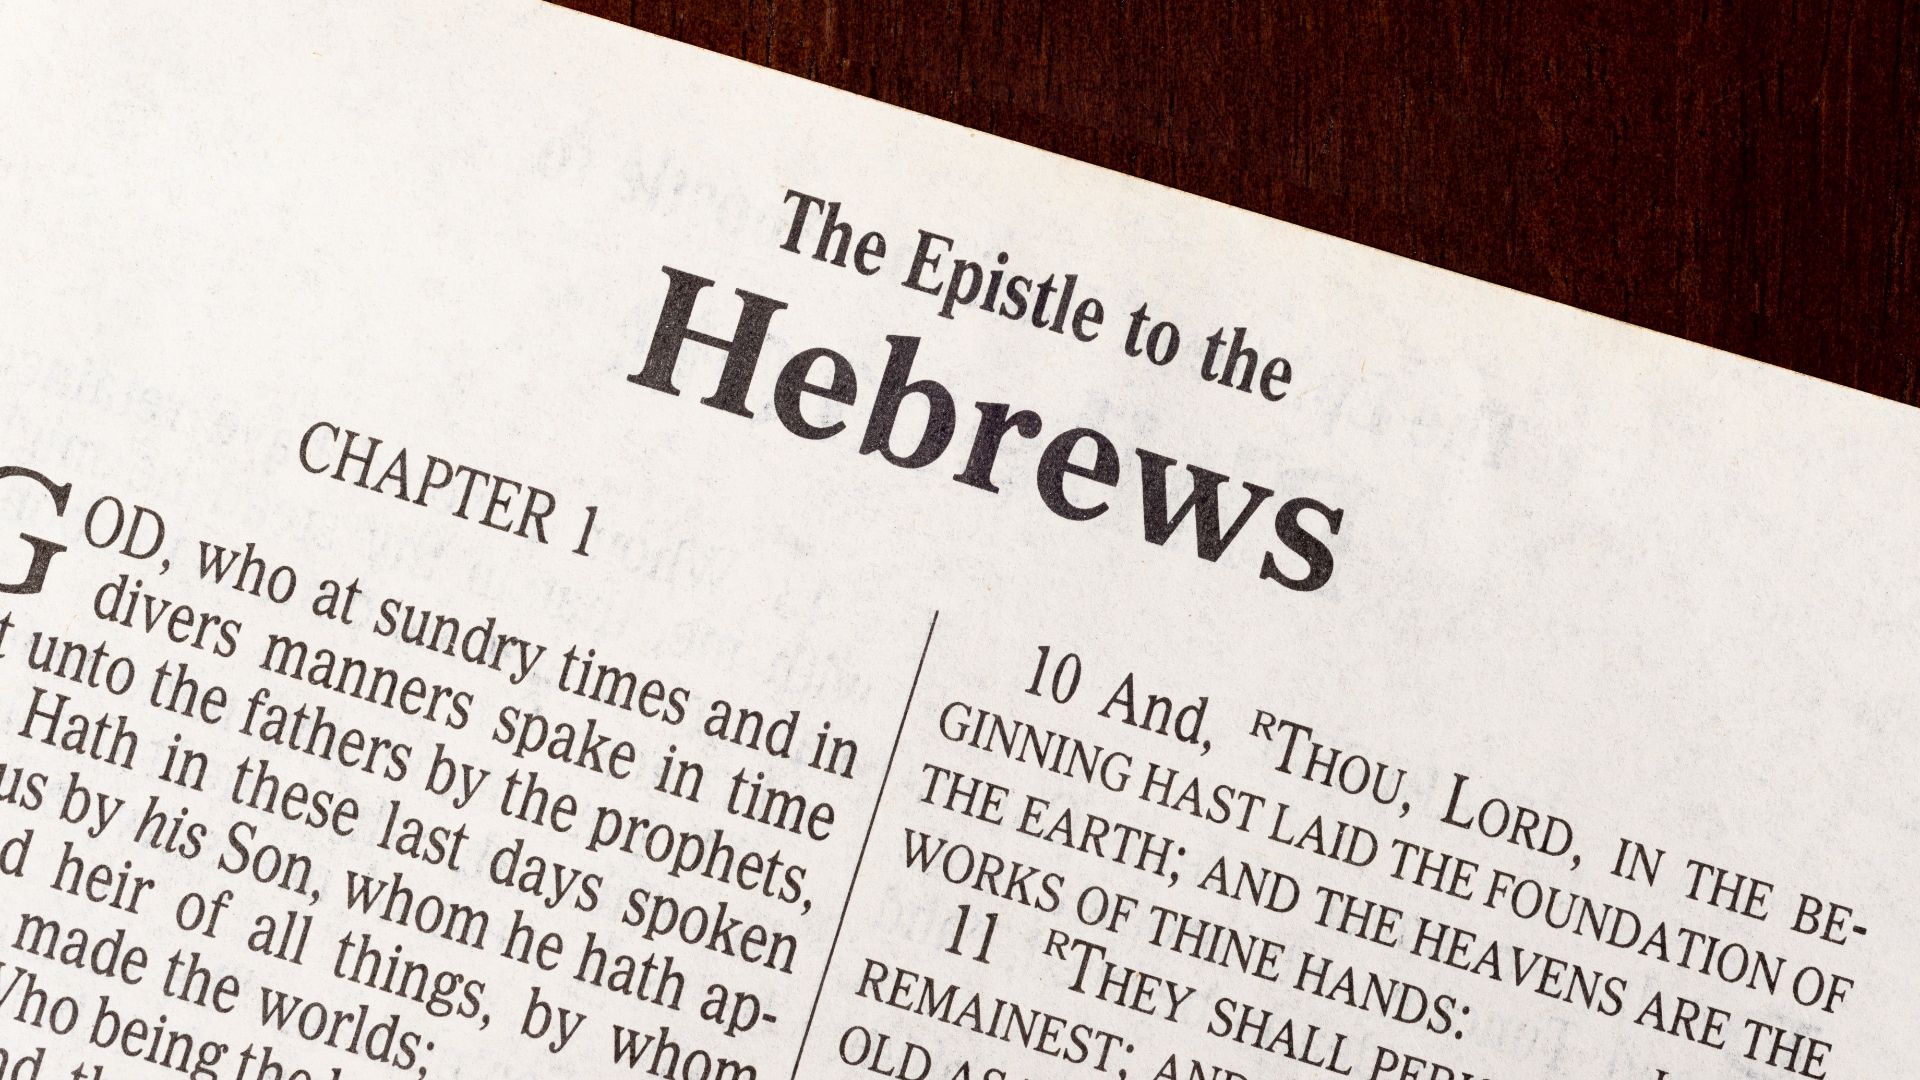 Why Jesus Came and Suffered (Hebrews 2:5-18)